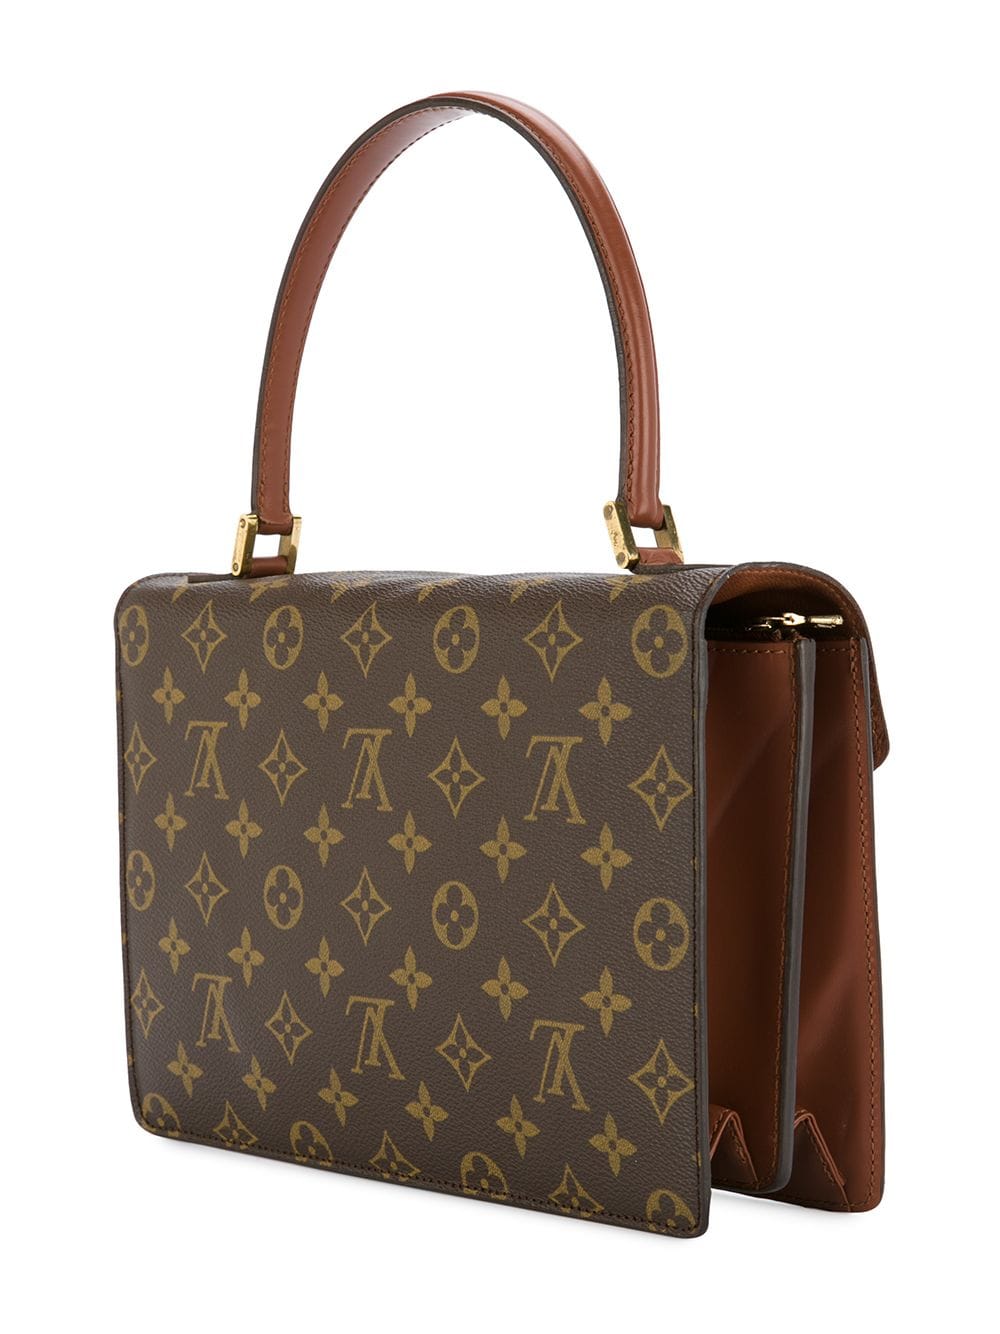 Concorde leather handbag Louis Vuitton Brown in Leather - 34104662